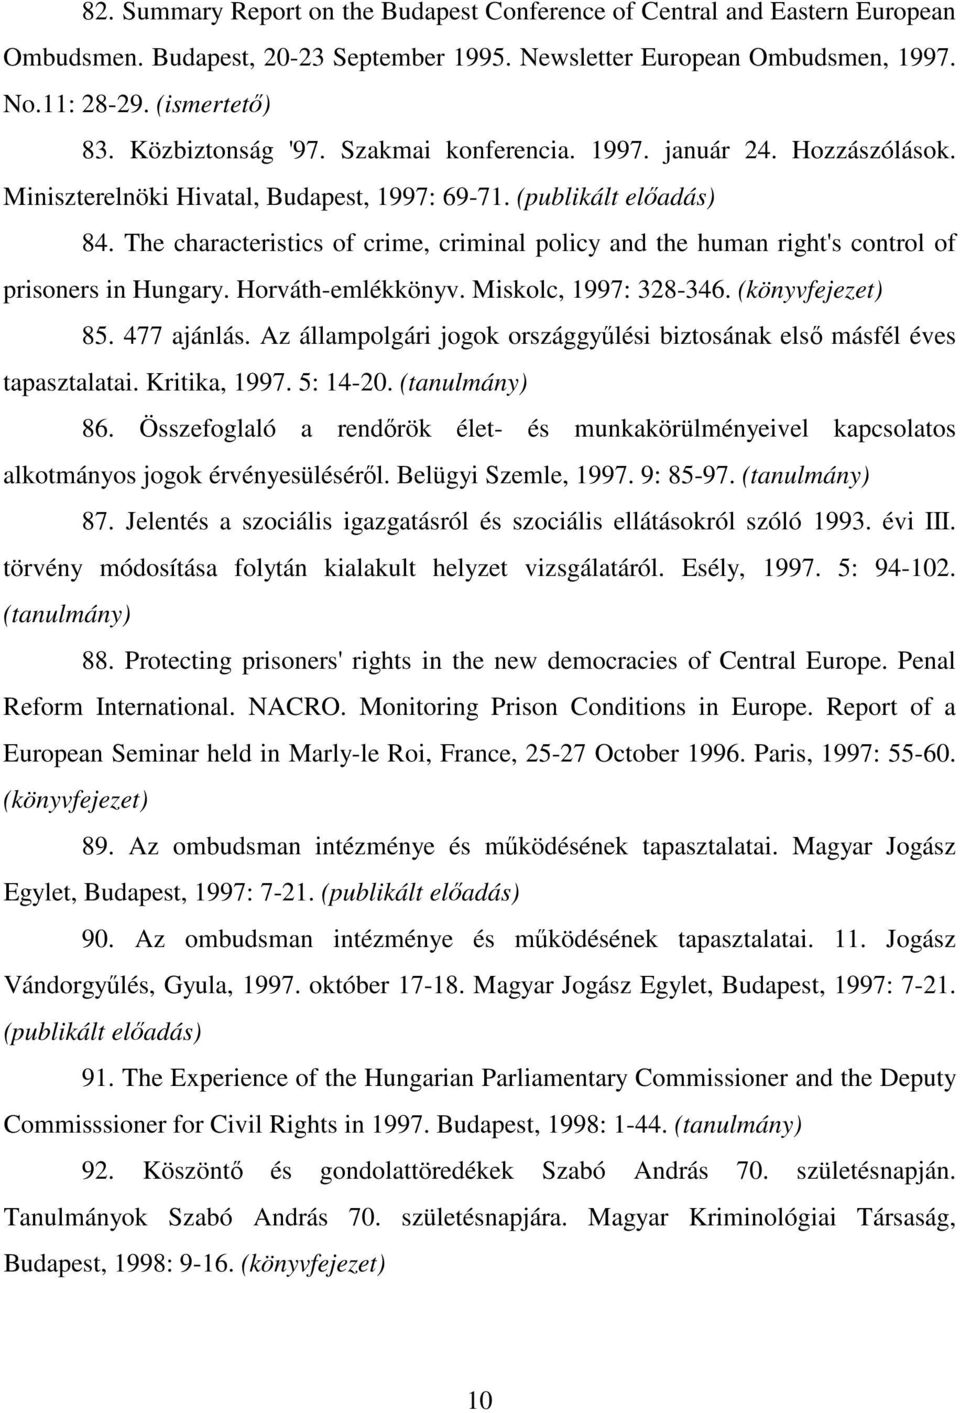 The characteristics of crime, criminal policy and the human right's control of prisoners in Hungary. Horváth-emlékkönyv. Miskolc, 1997: 328-346. 85. 477 ajánlás.